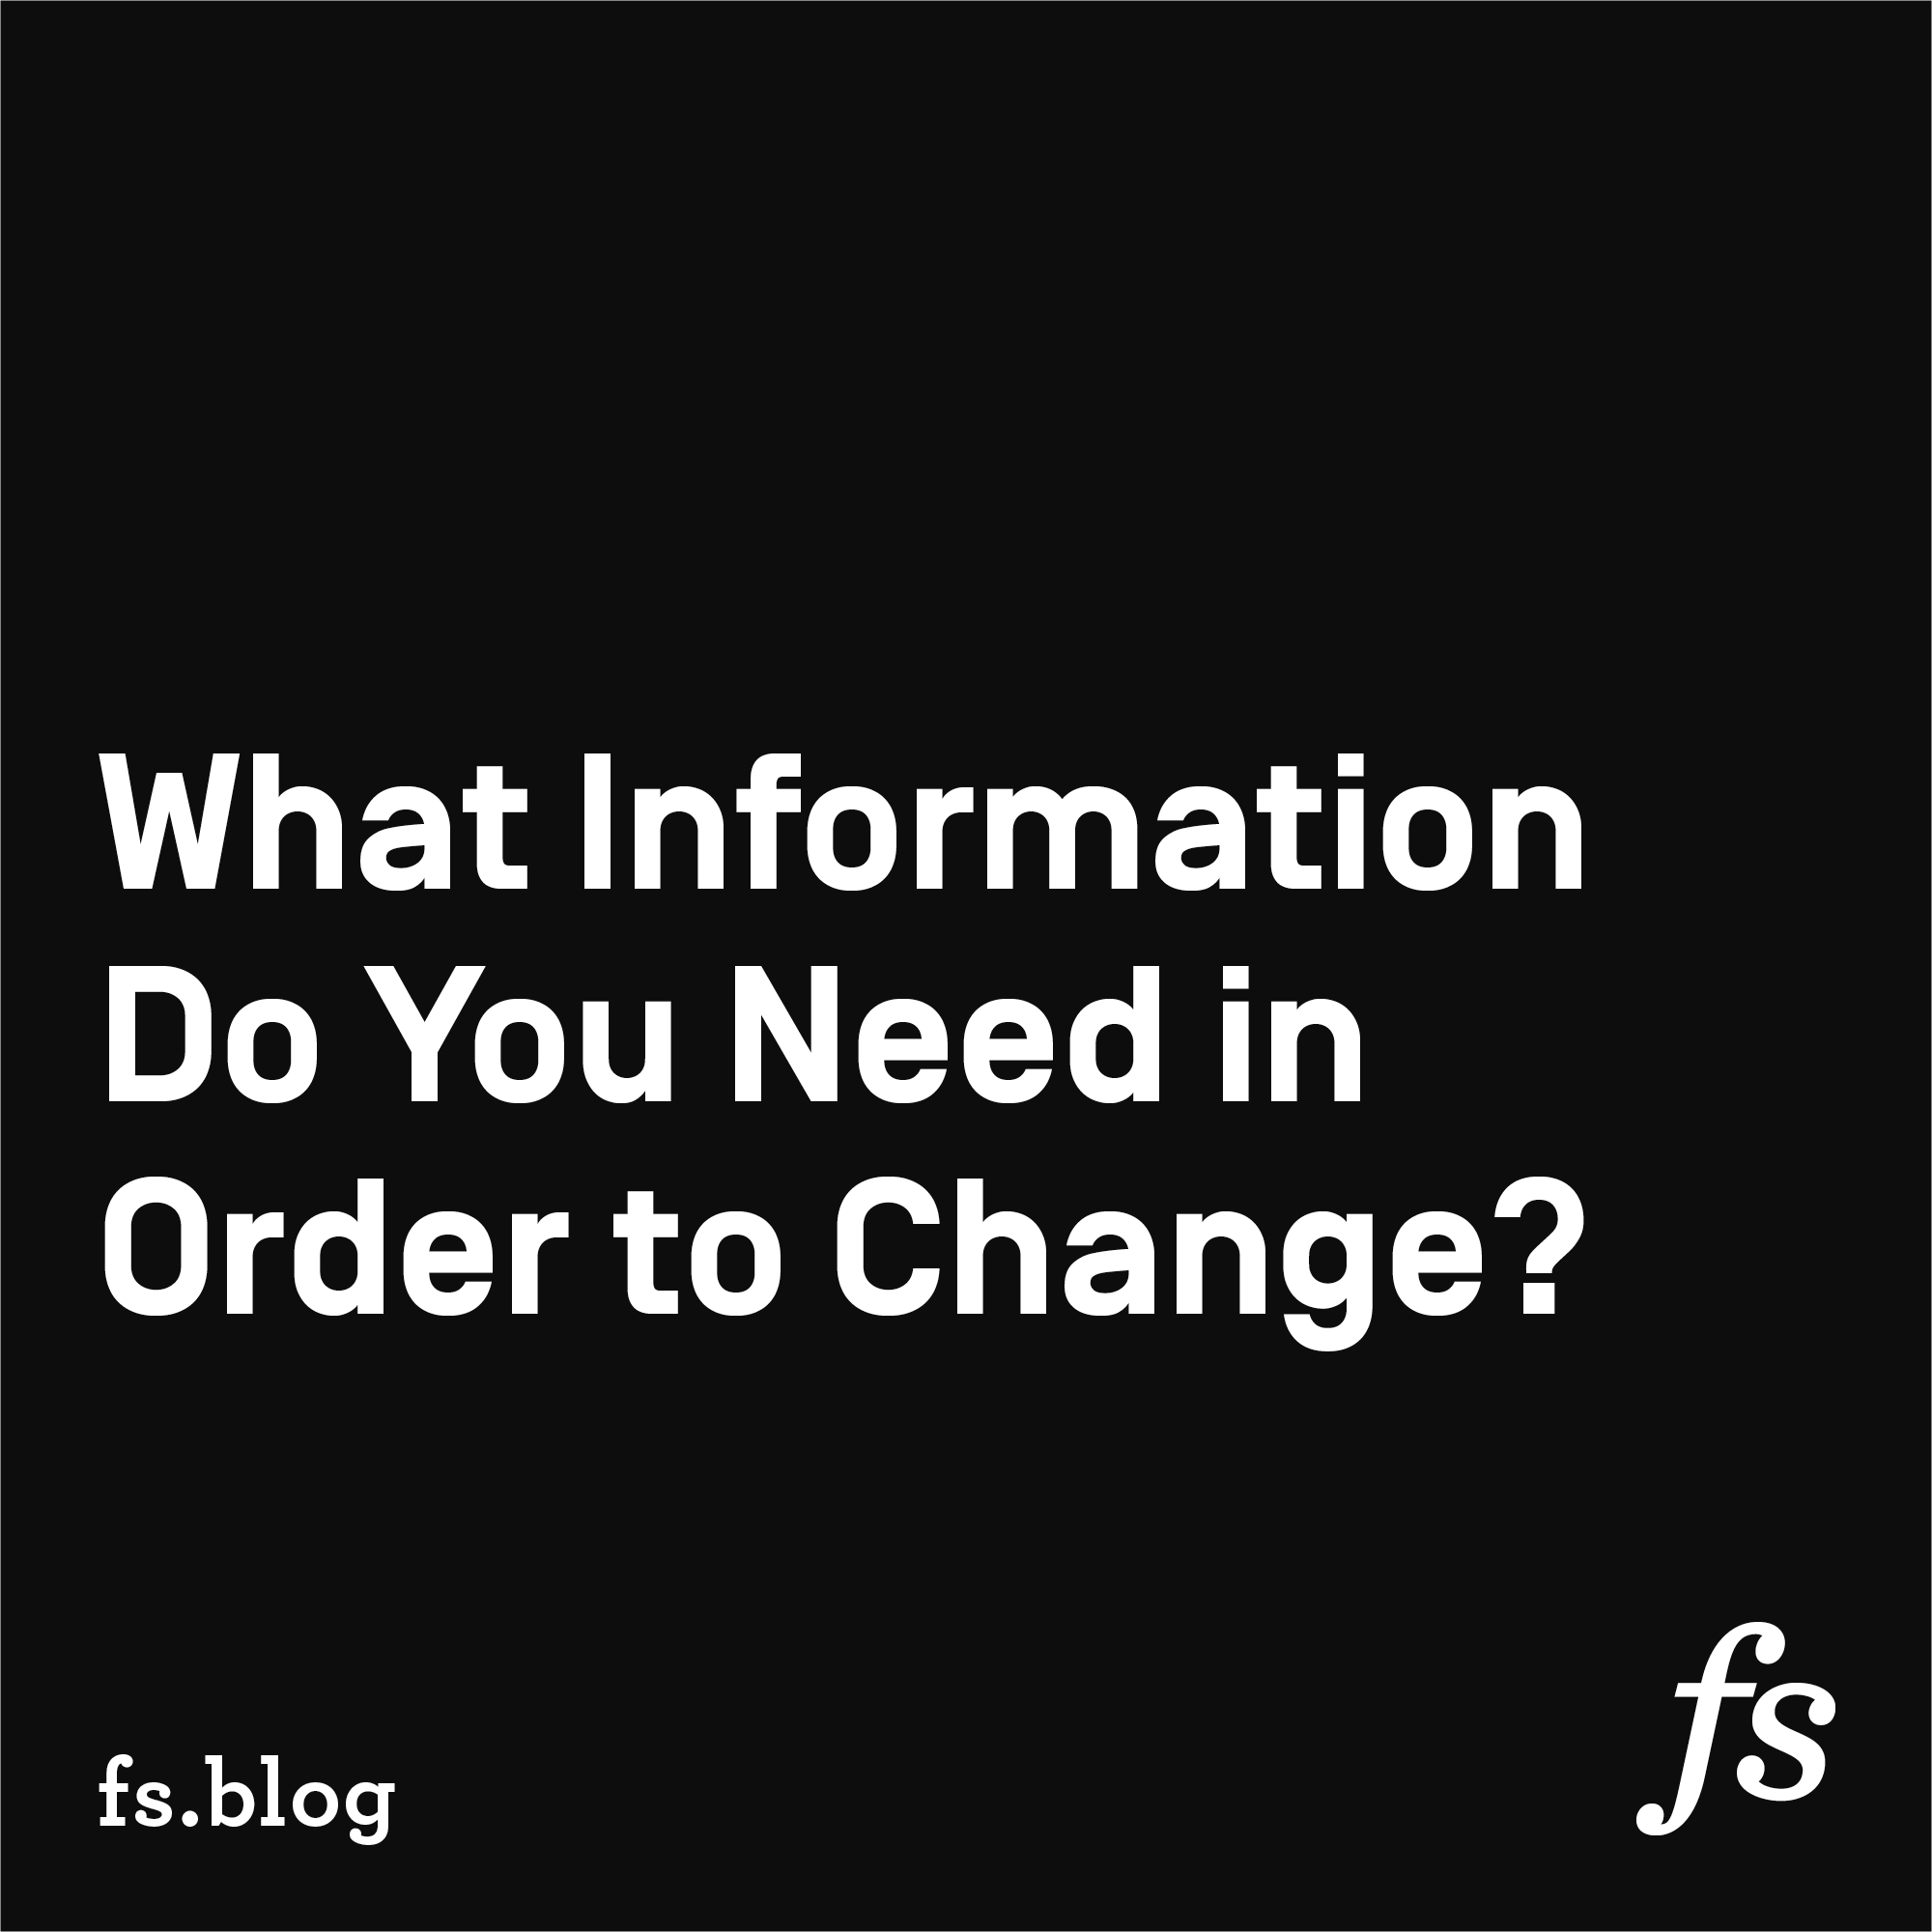 What Information Do You Need in Order to Change?